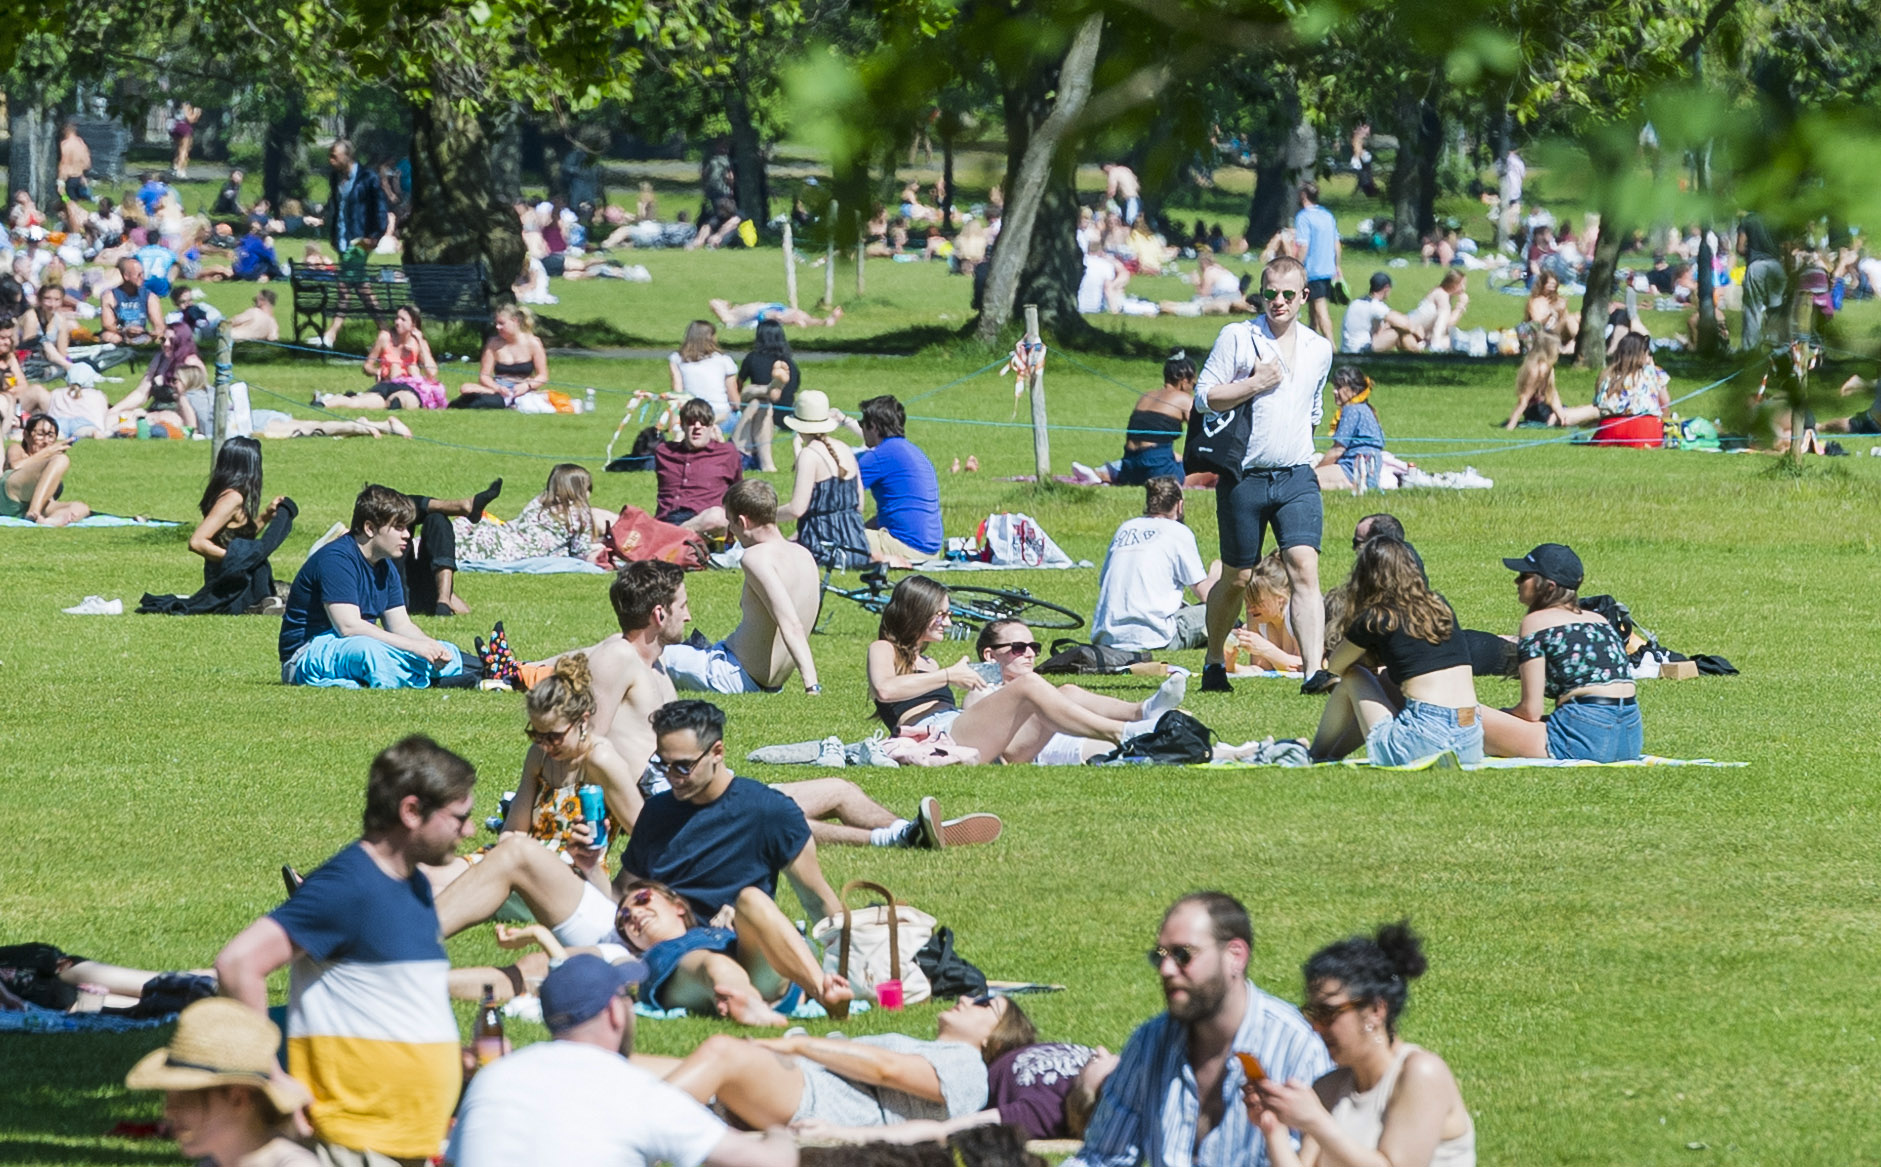 Members of the public enjoy the sun in the Edinburgh meadows after the easing of lockdown restrictions on May 30. (SNS)